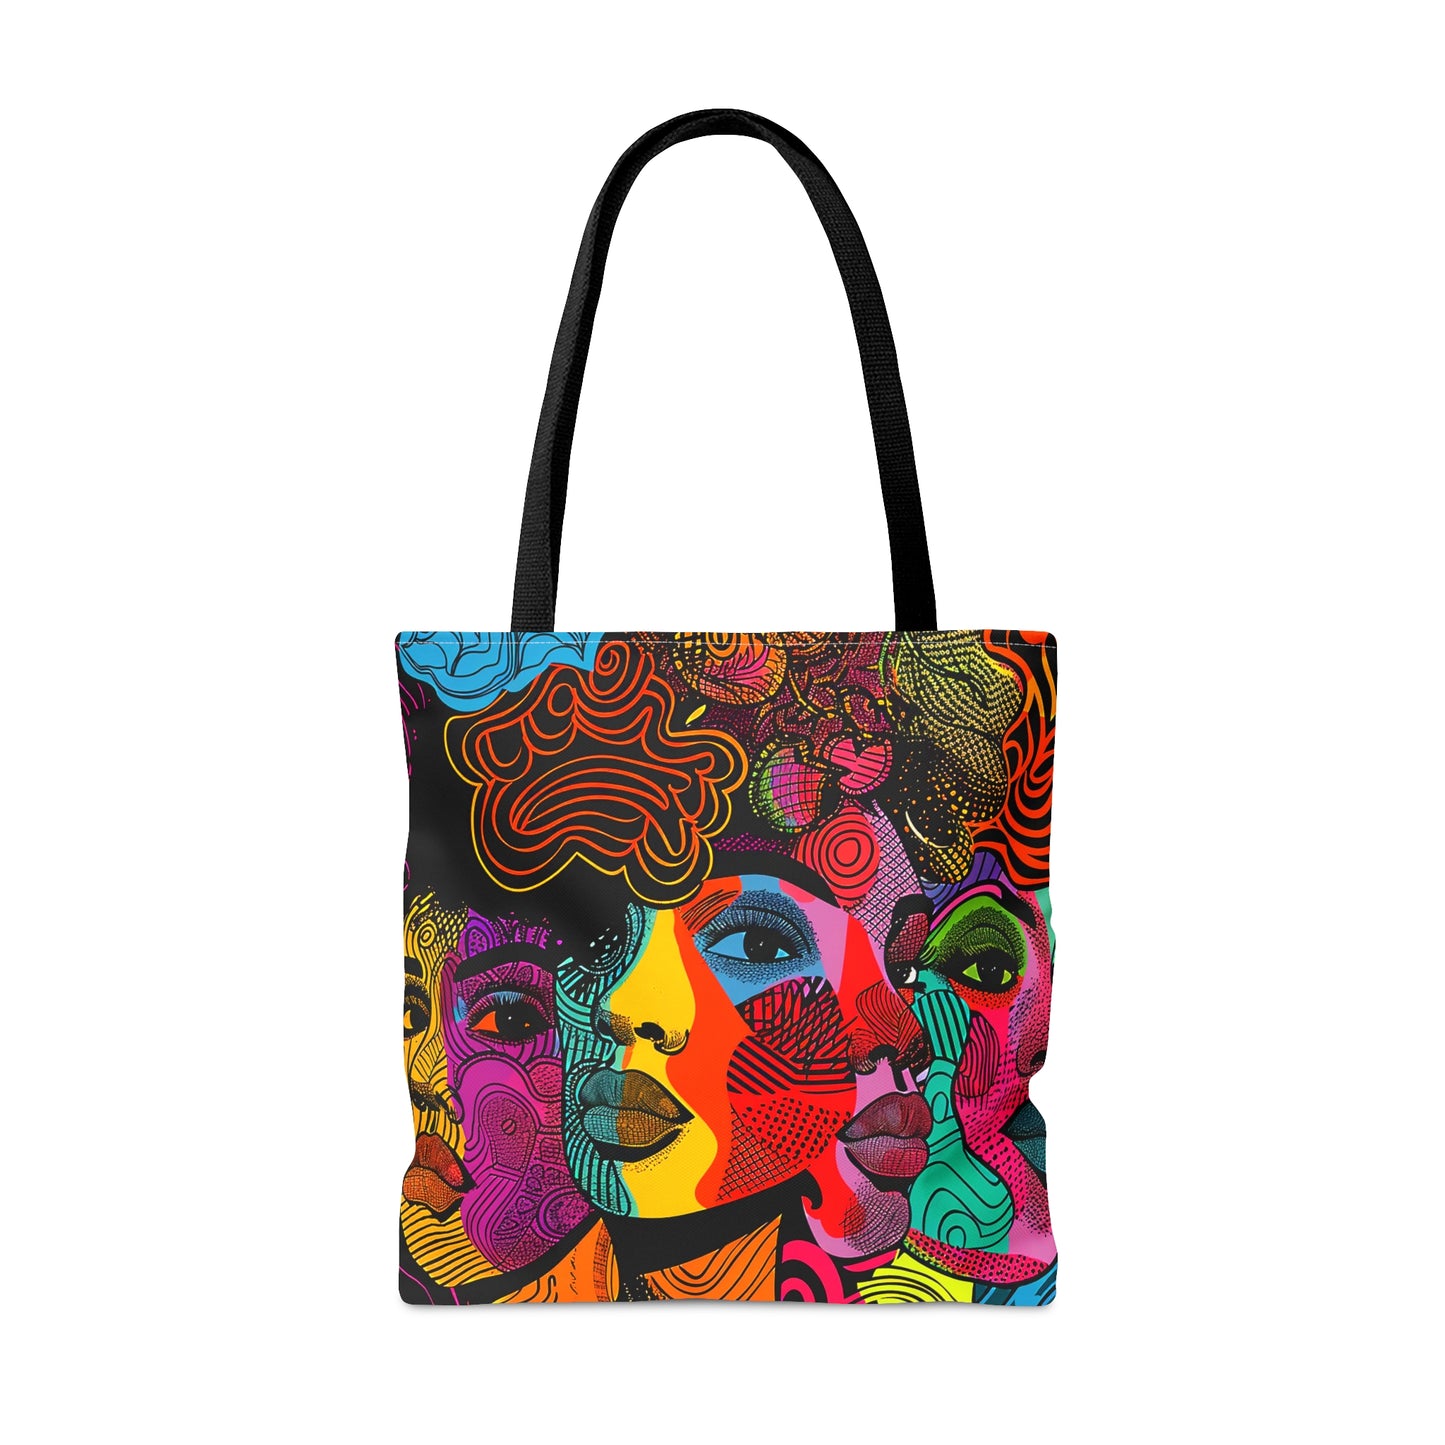 Colorful Faces Tote Bag